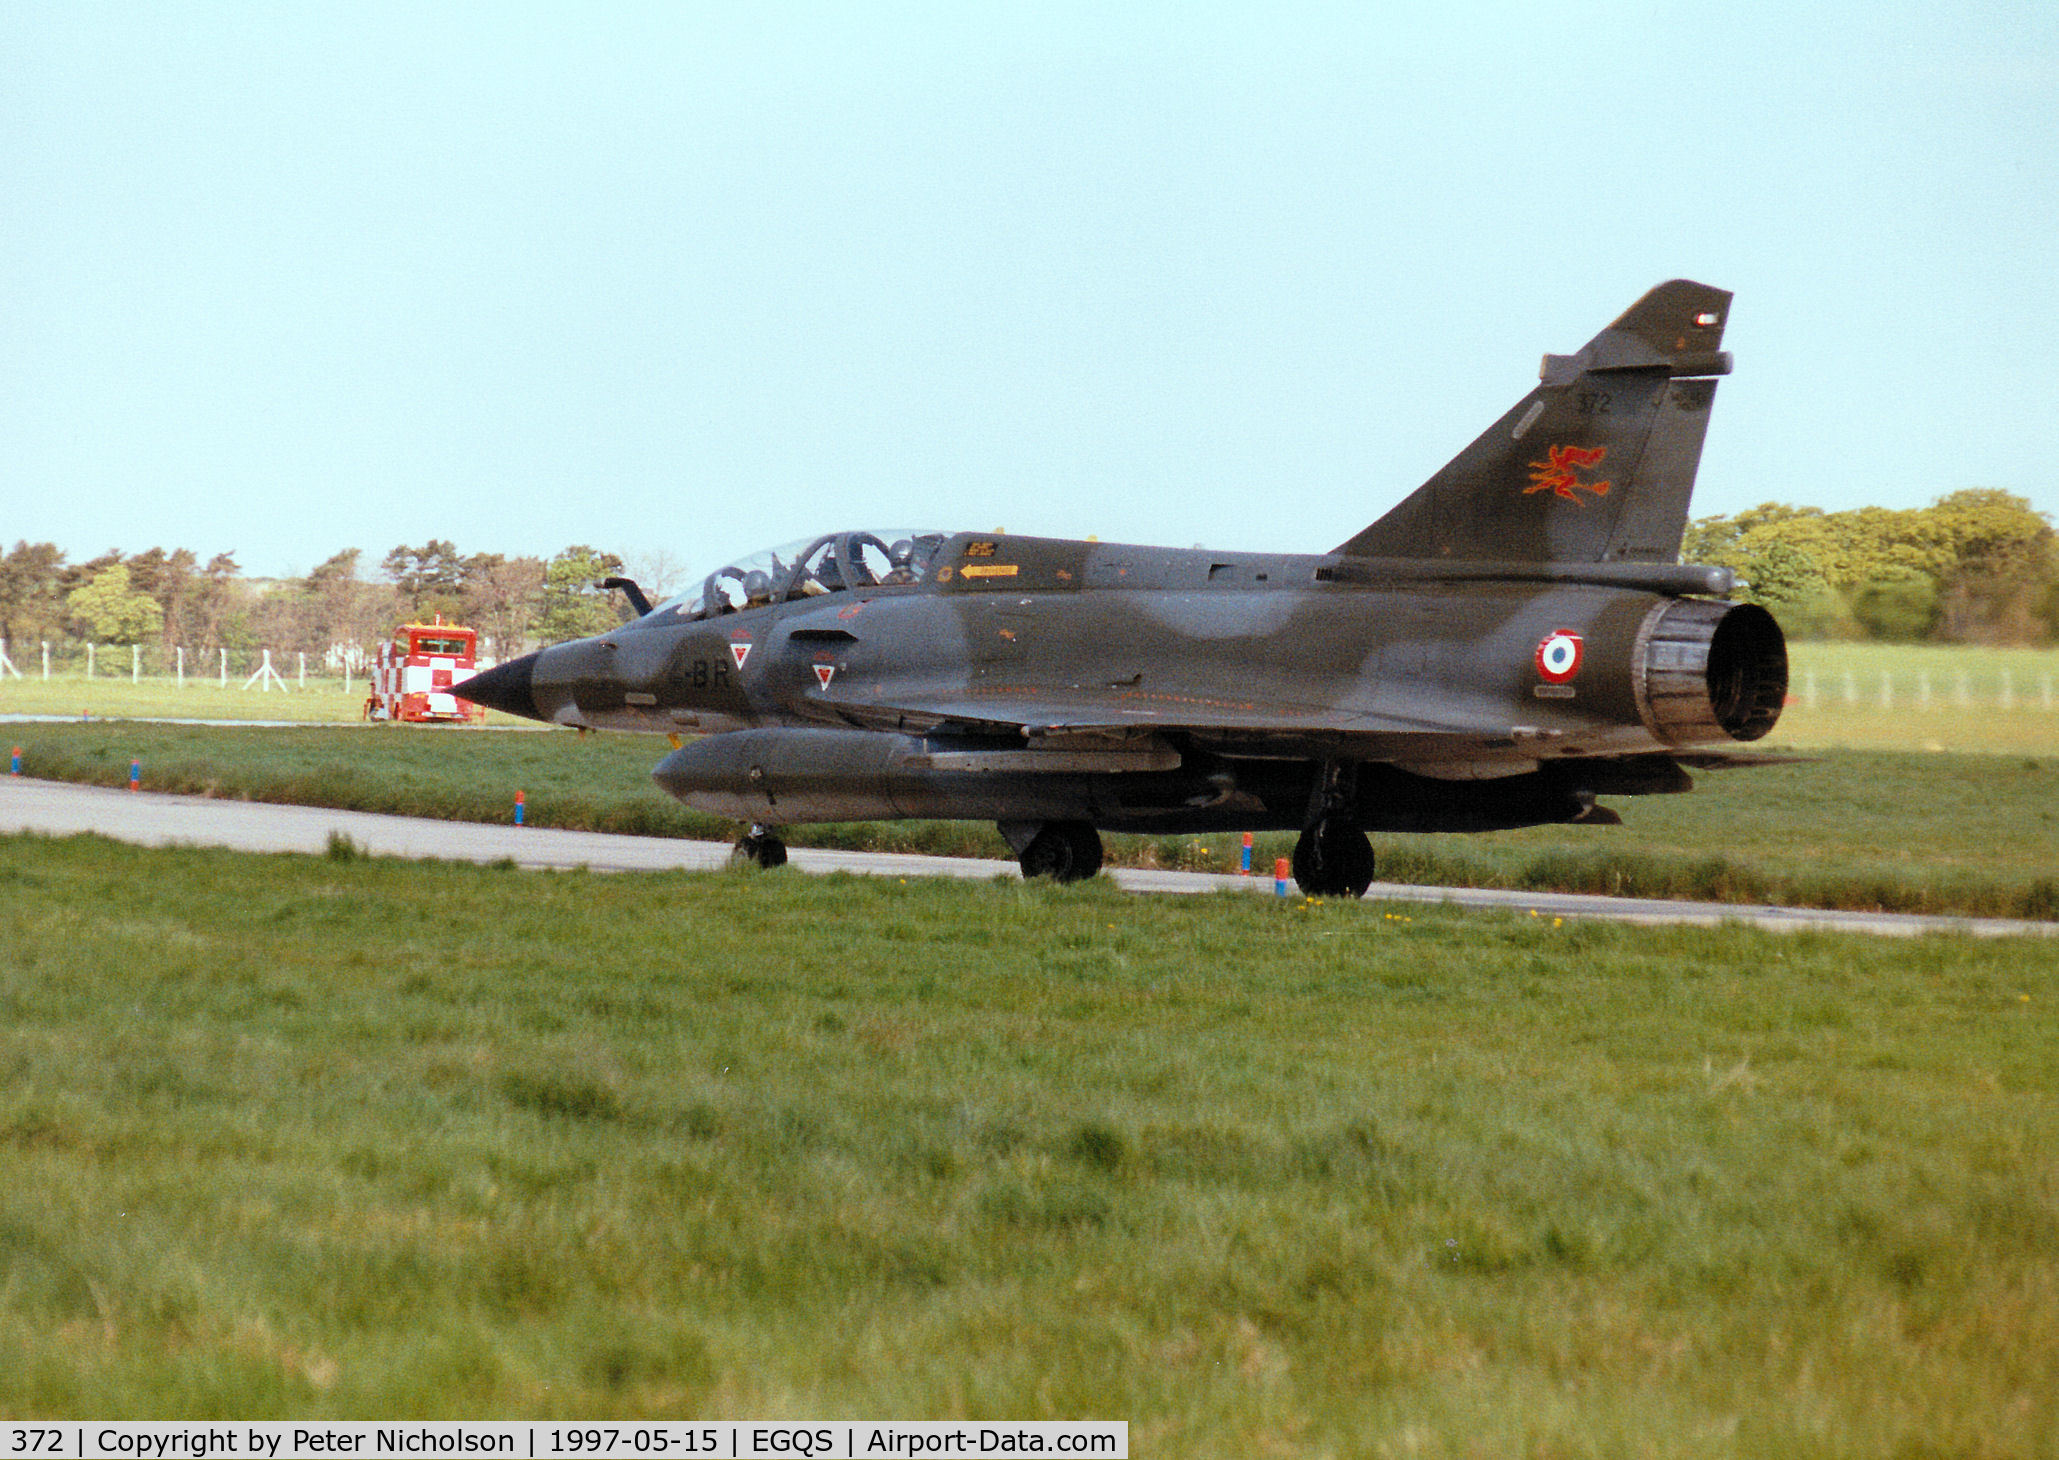 372, Dassault Mirage 2000N C/N 386, French Air Force Mirage 2000N of EC 02.004 taxying to Runway 05 at RAF Lossiemouth in the Summer of 1997.